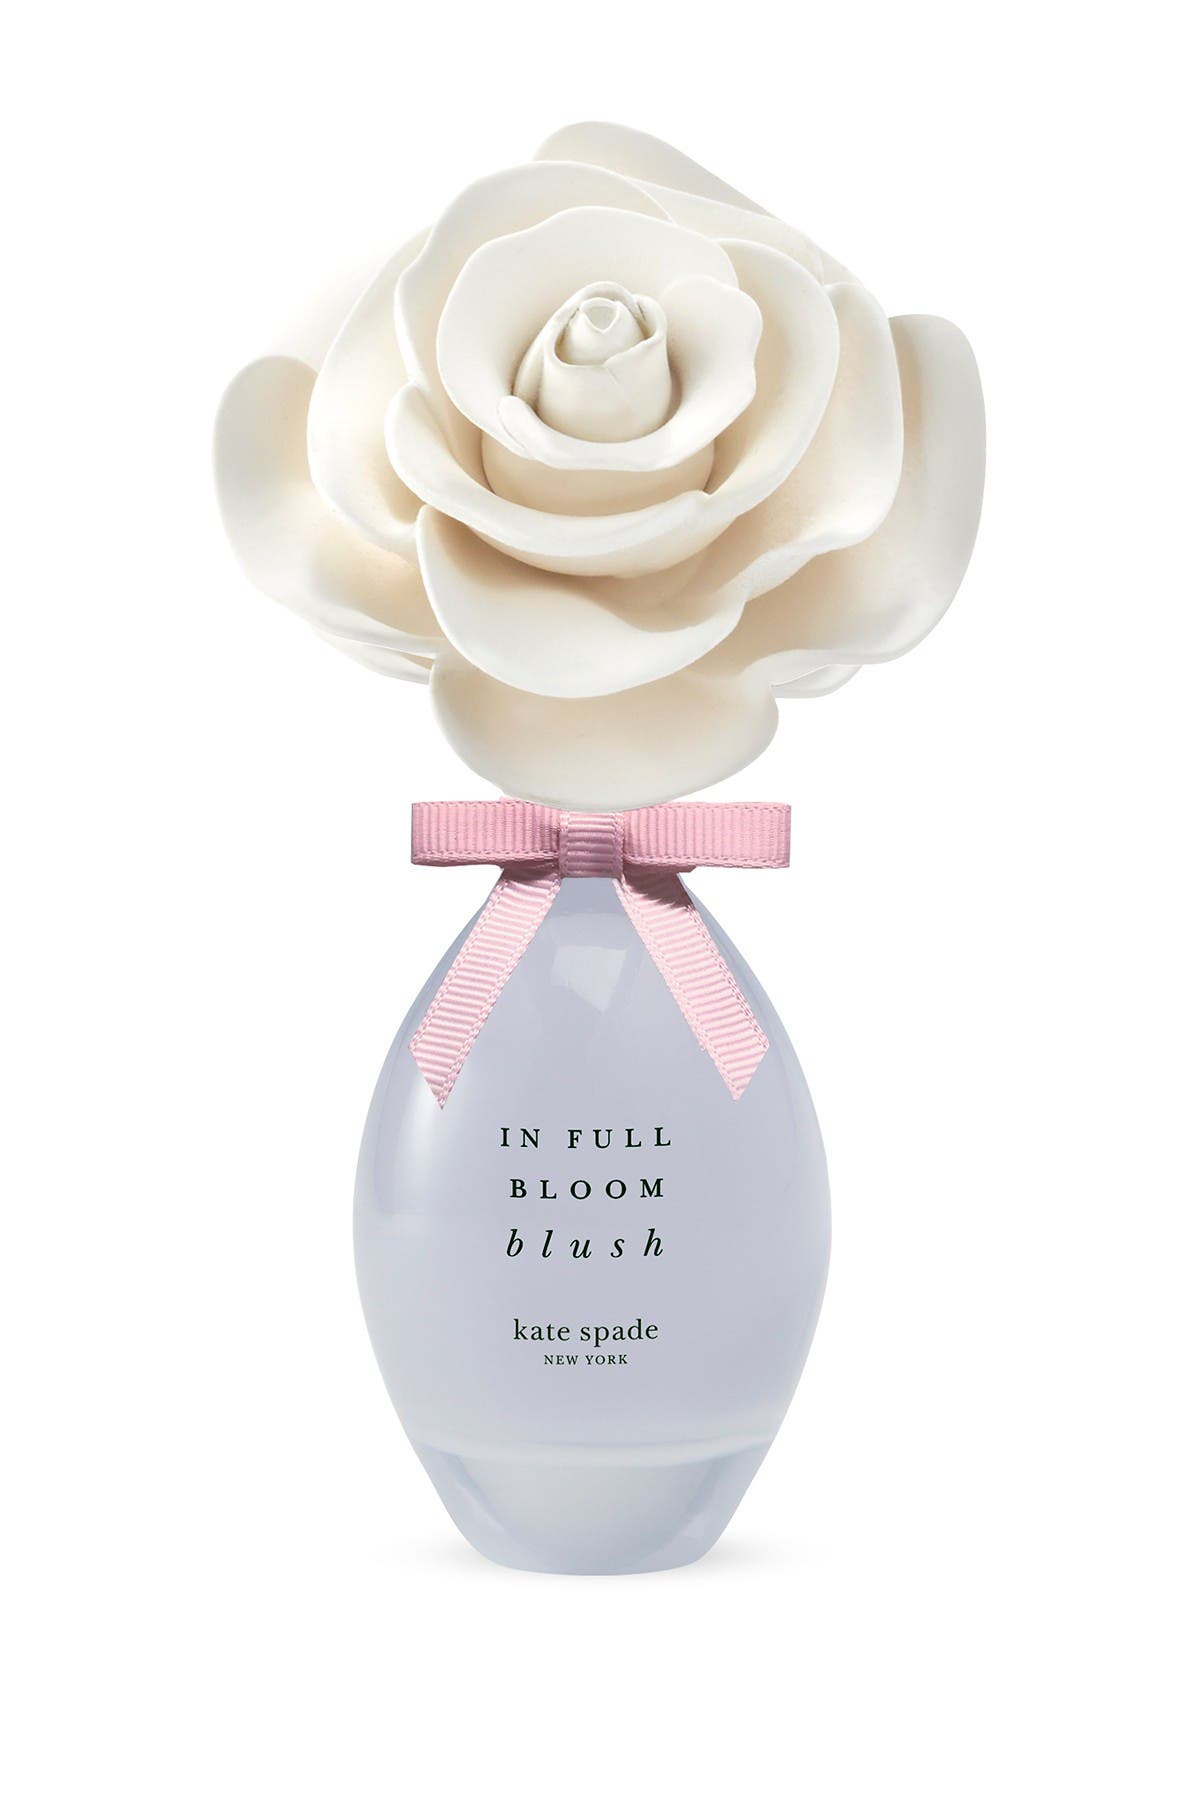 In Full Bloom Blush Perfume - Kate Spade - YouFromMe